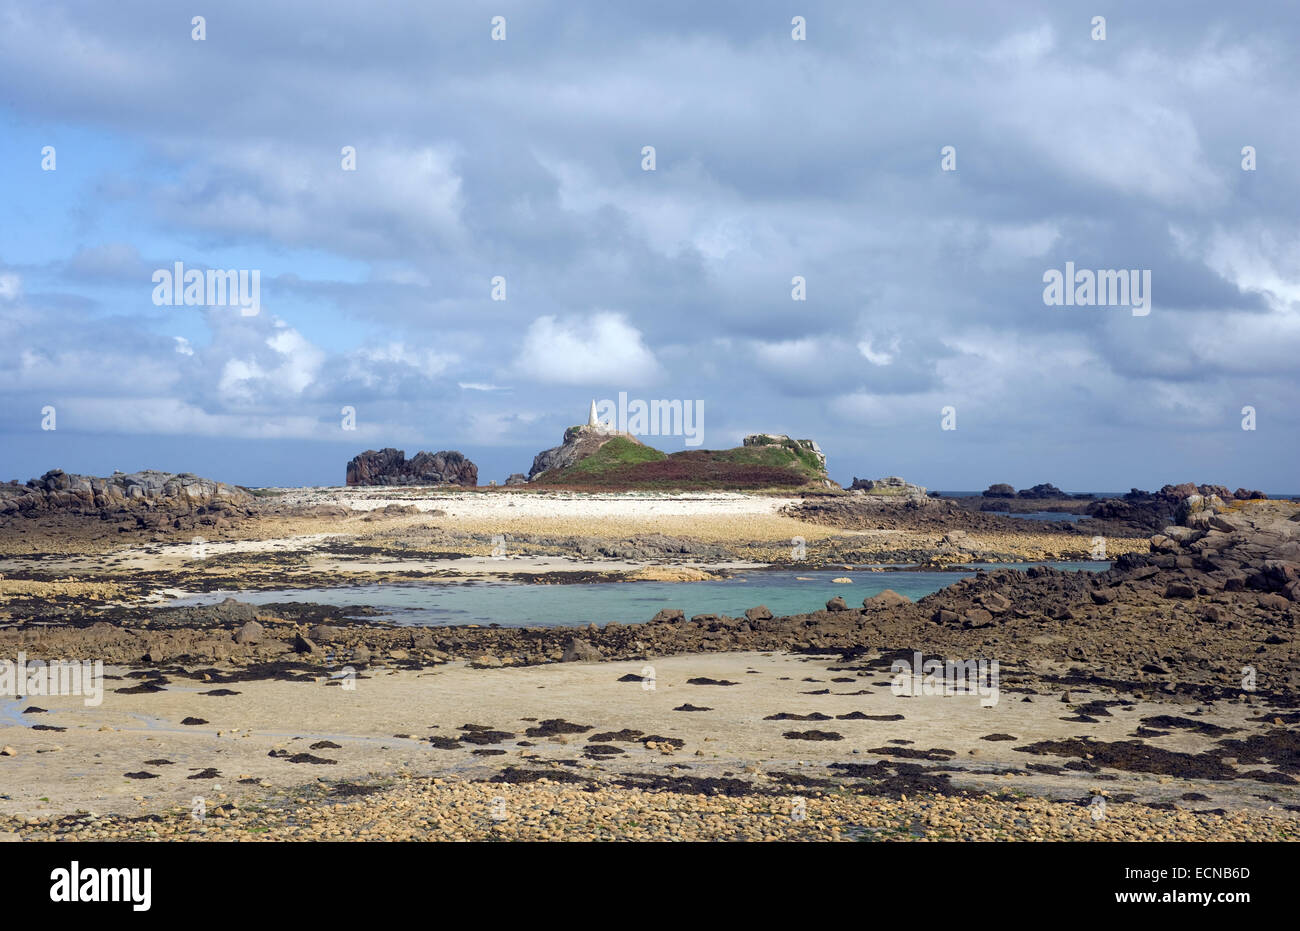 Beach scene at Beauport, Paimpol, Brittany,France Stock Photo